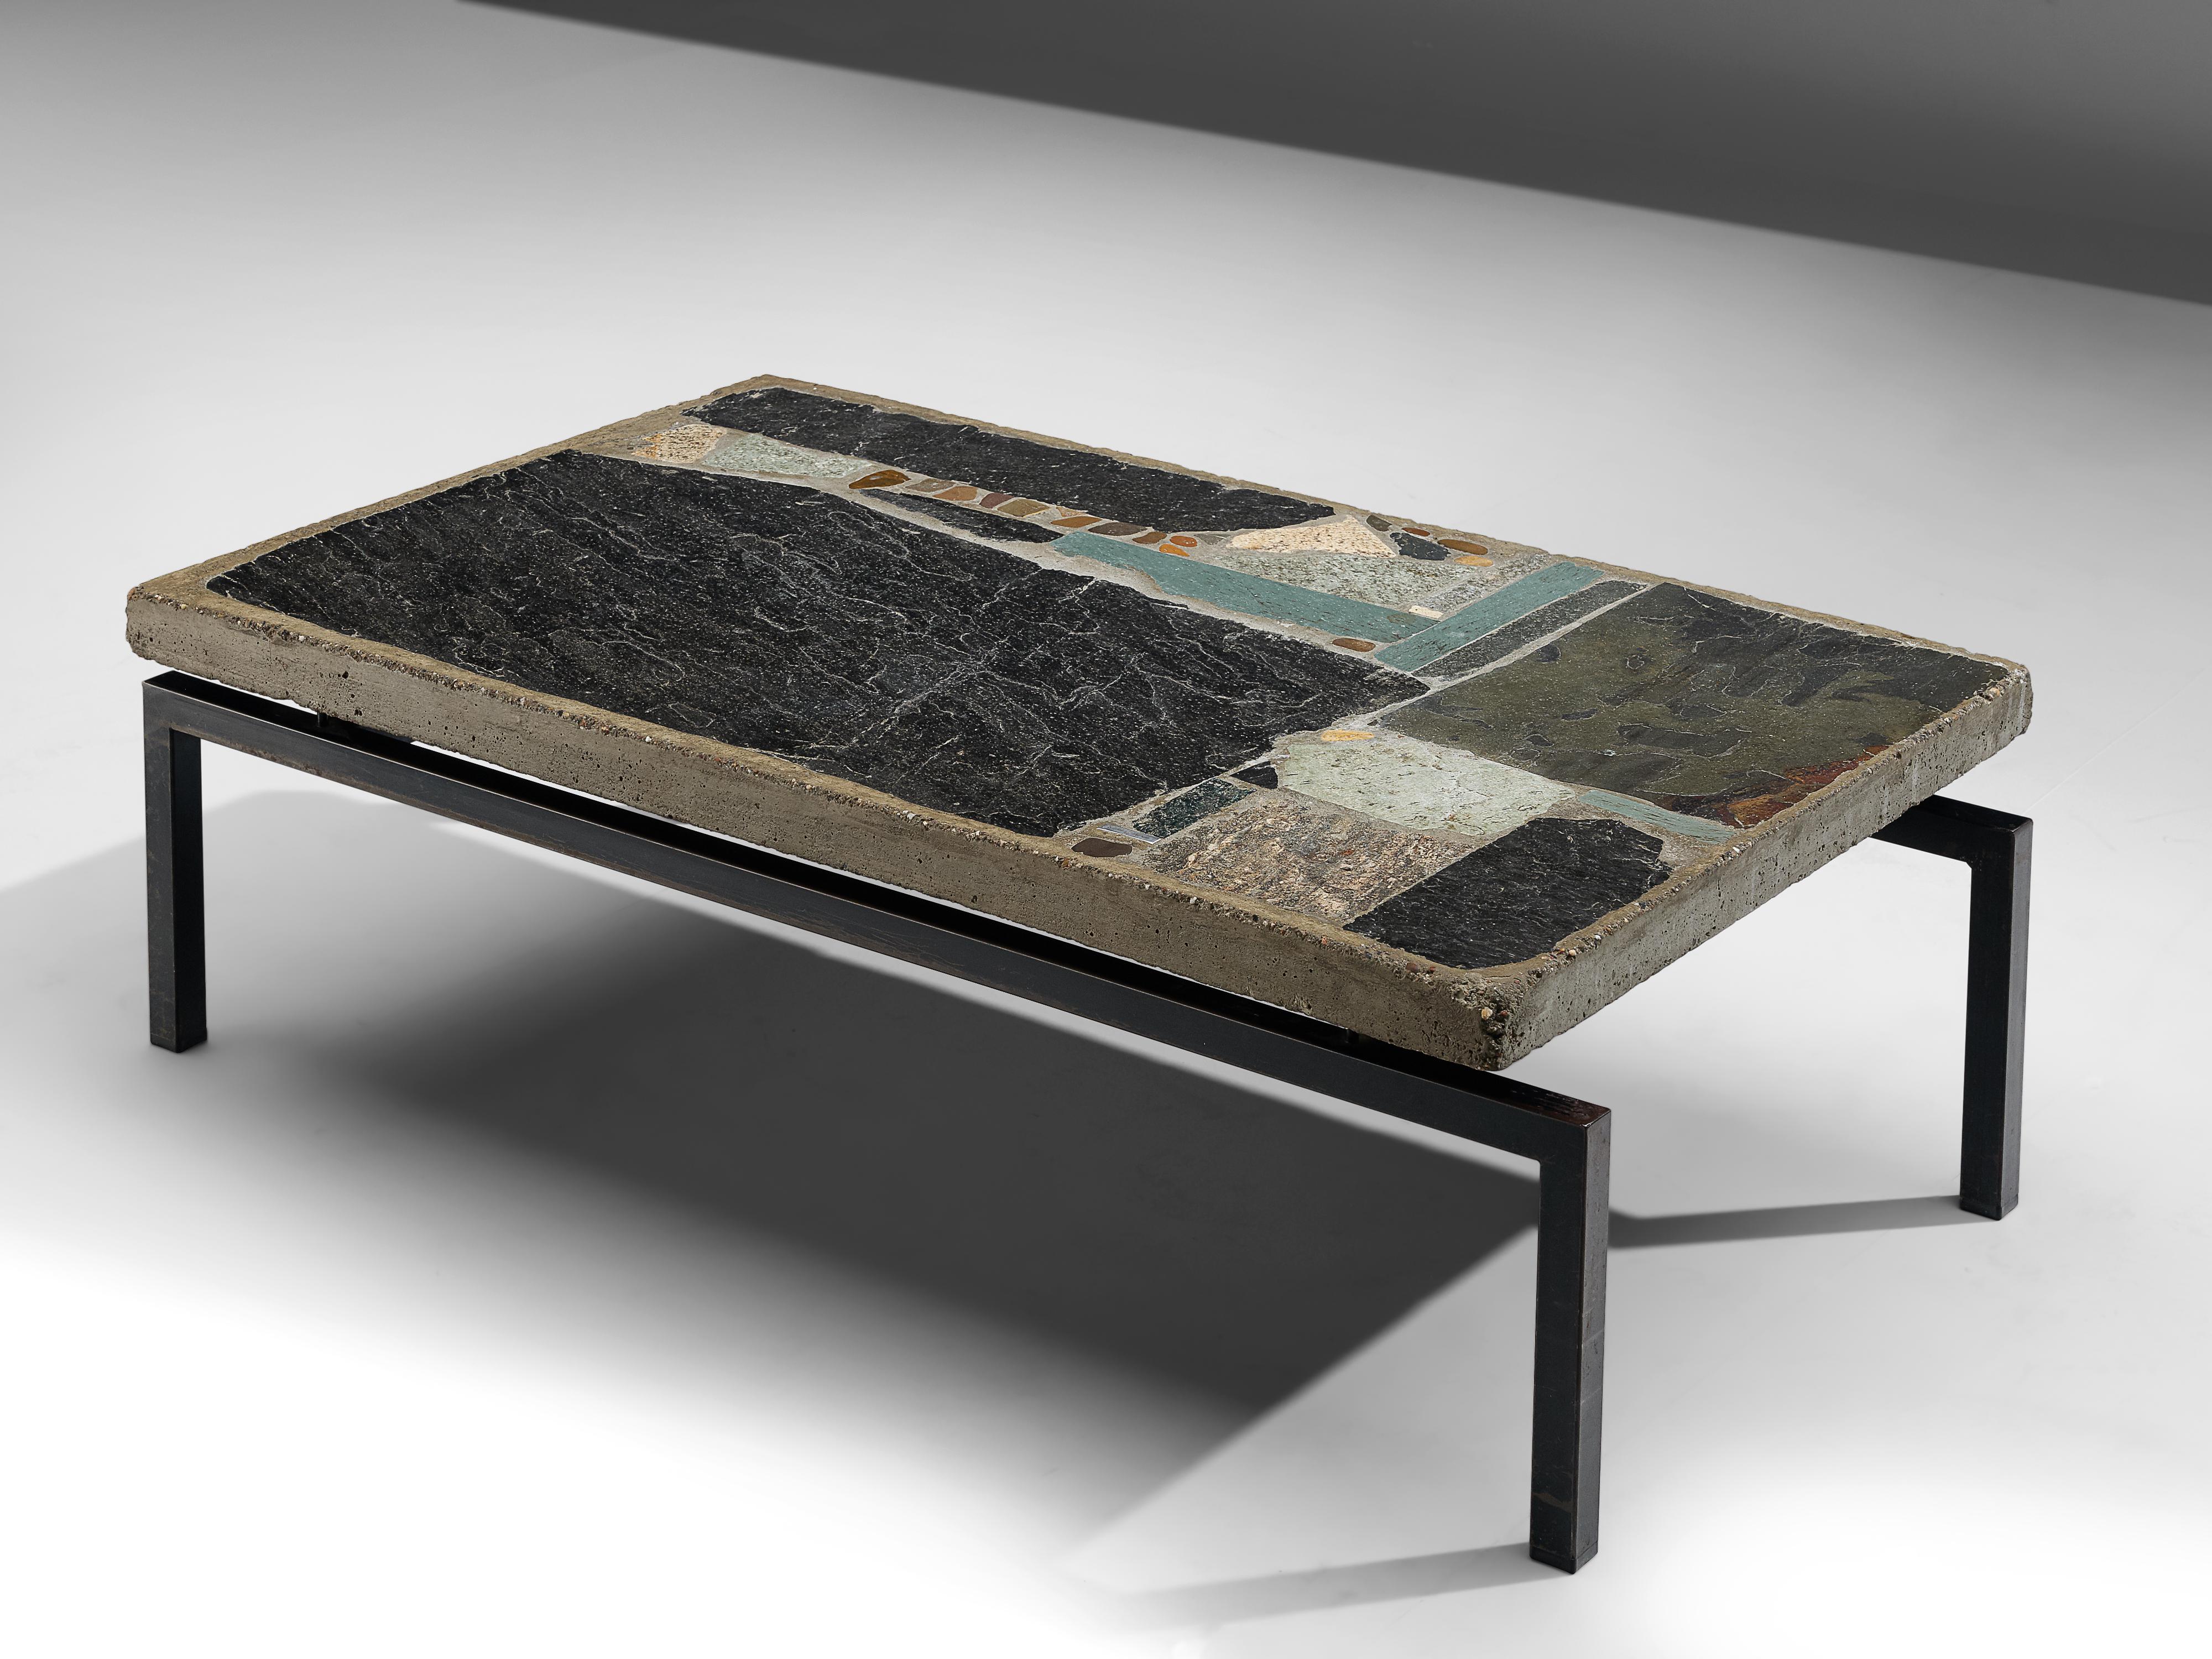 Paul Kingma, slate and ceramic tile coffee table, Netherlands, 1965

Abstract design of metals, slate and other stones, set into a concrete panel. The vibrant surface and the correspondence between different colors and materials forms a striking